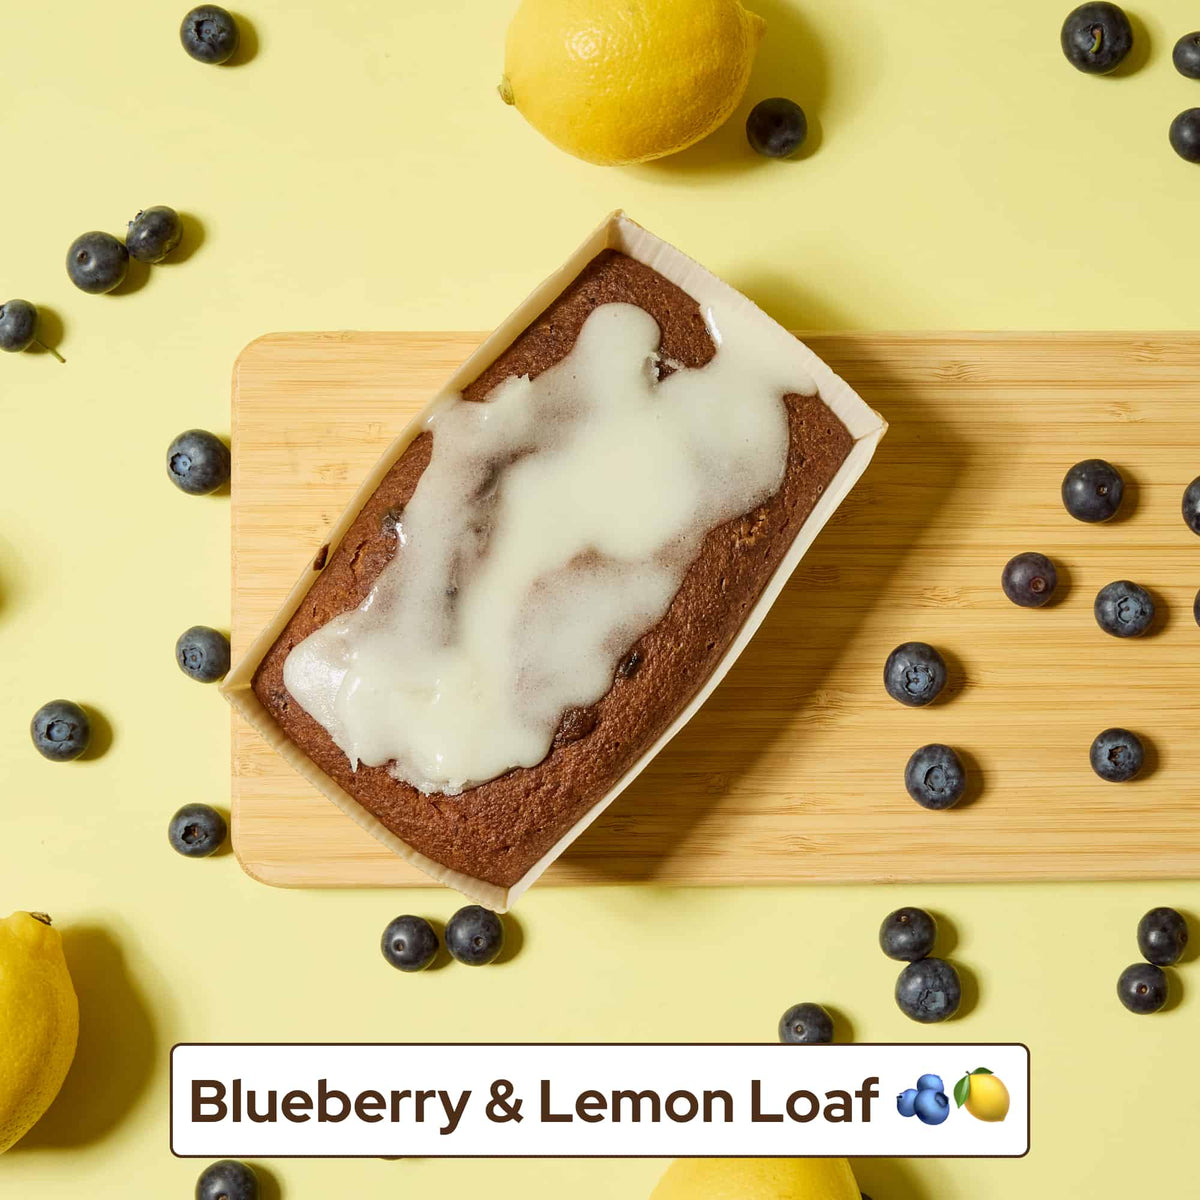 Indulge in the perfect tea-time trio with our Summer Loaves Bundle from No Guilt Bakes. Satisfy your cravings with the refreshing combination of juicy blueberries and tangy lemon, while keeping